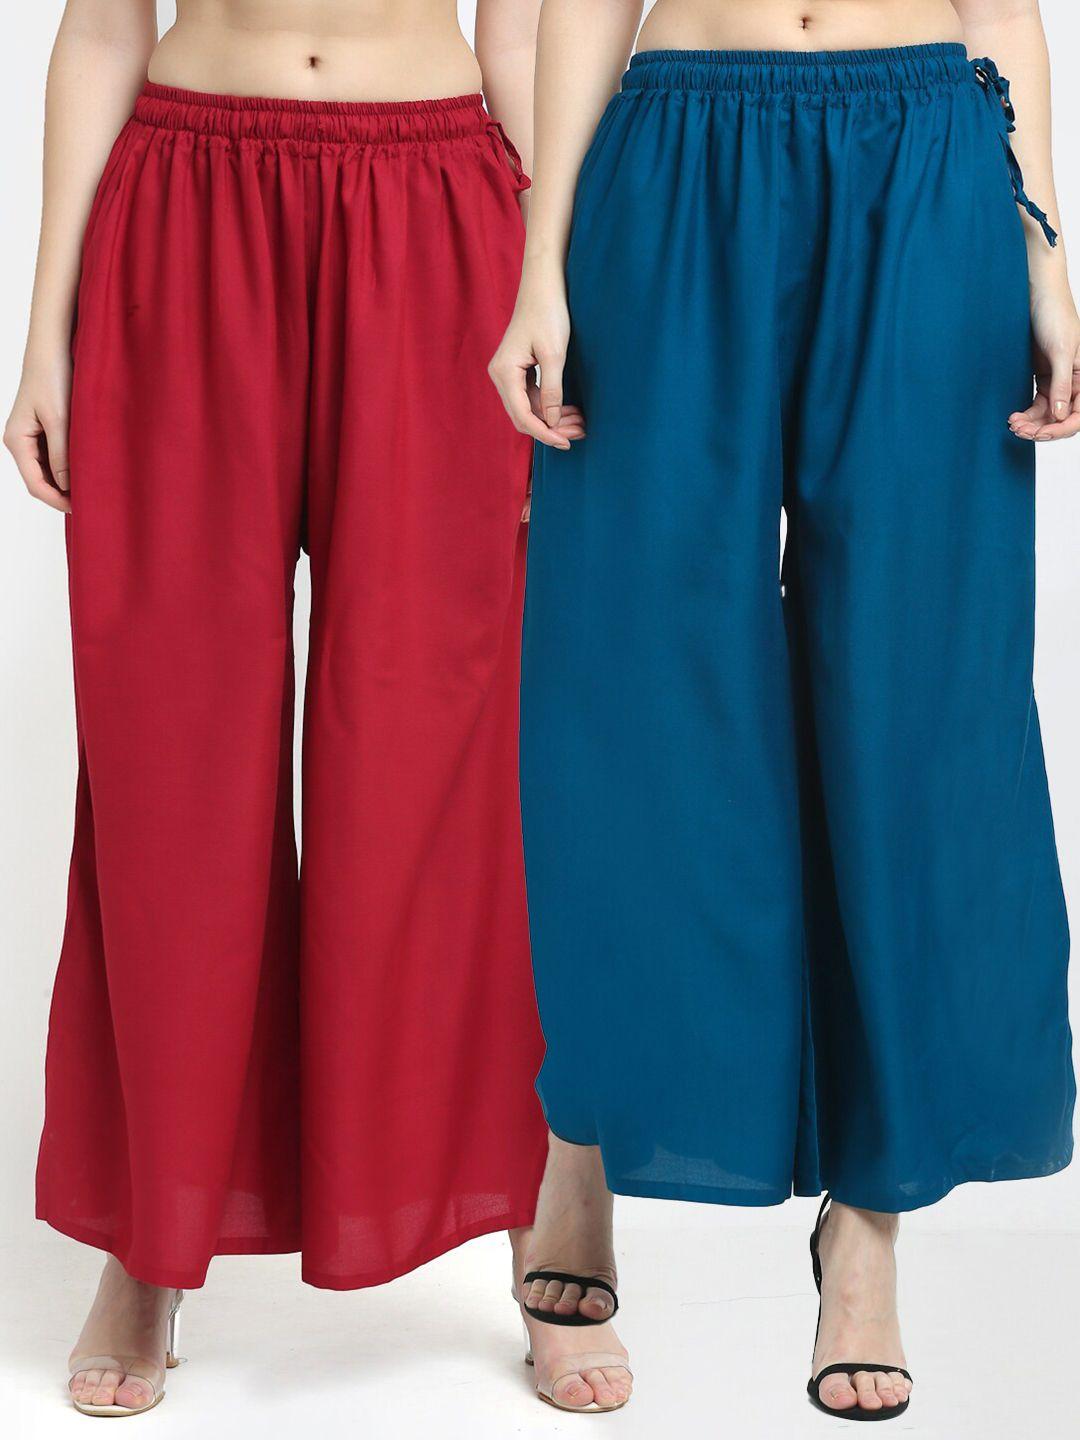 tag 7 pack of 2 women maroon & navy blue flared ethnic palazzos